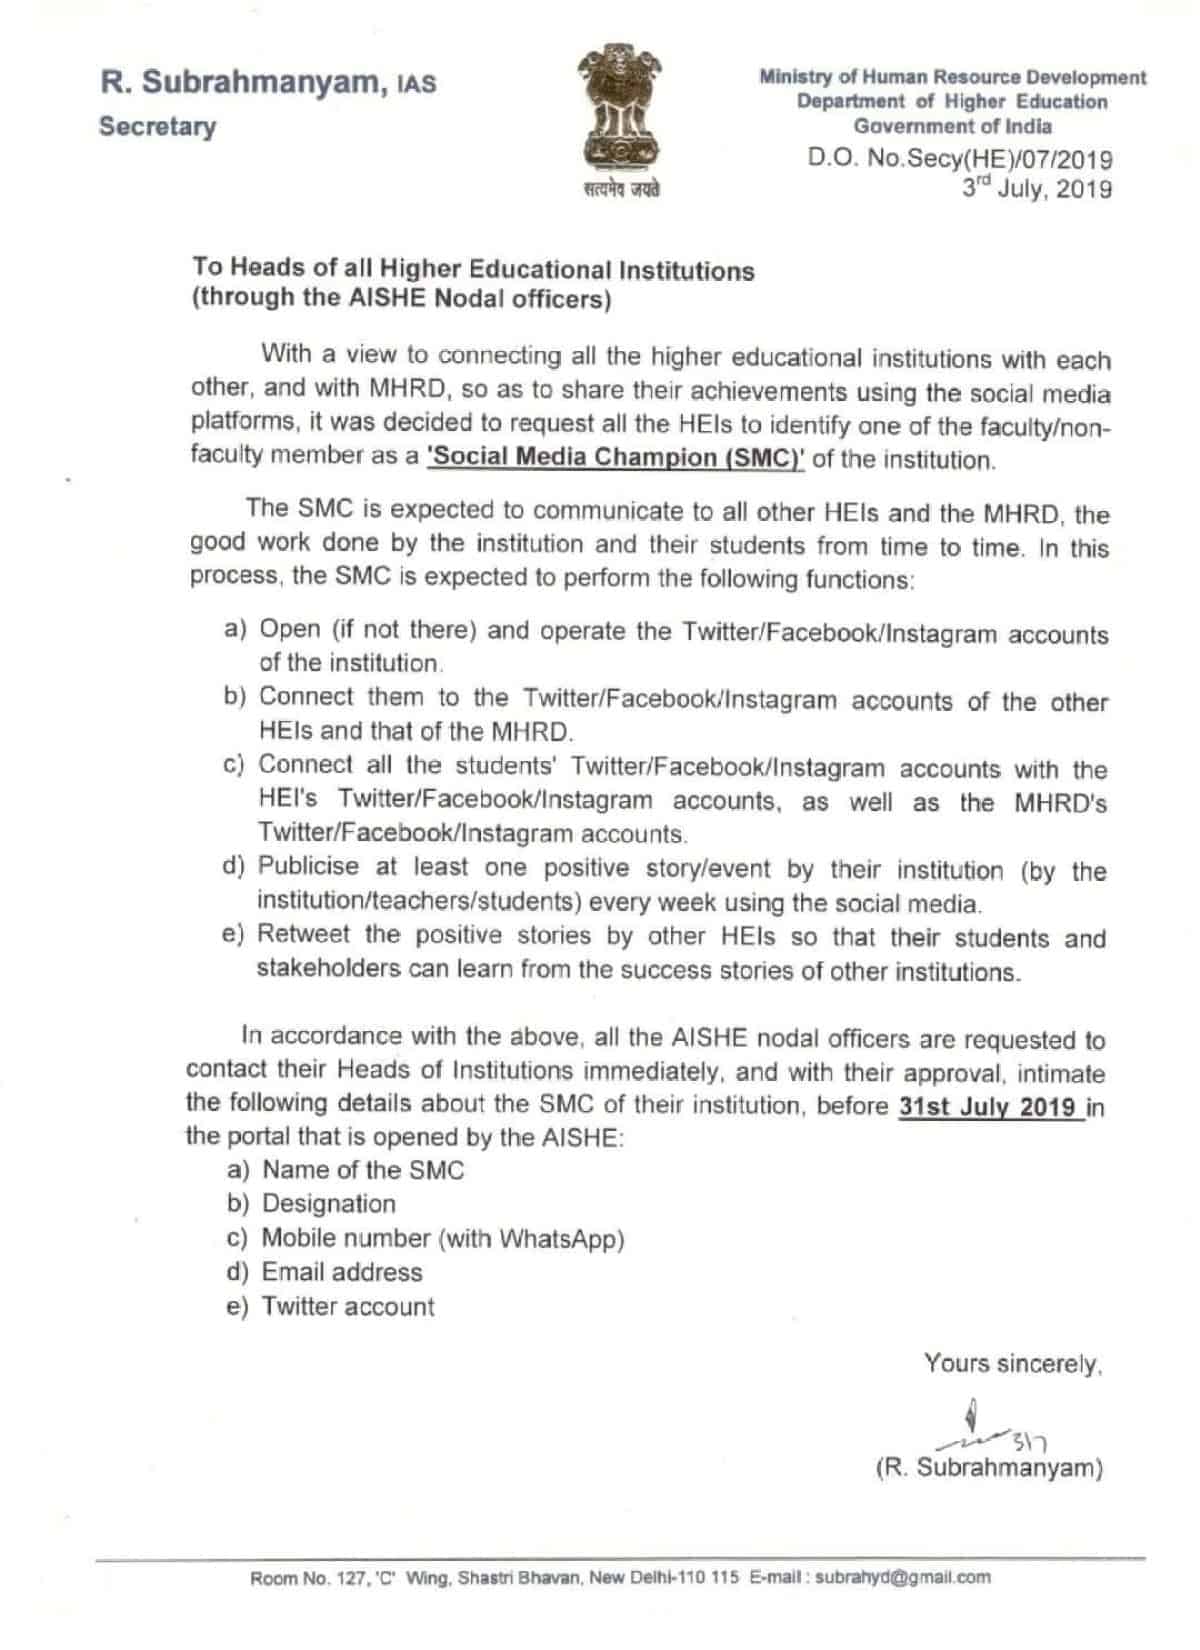 A copy of the MHRD’s letter sent to all Higher Education Institutes